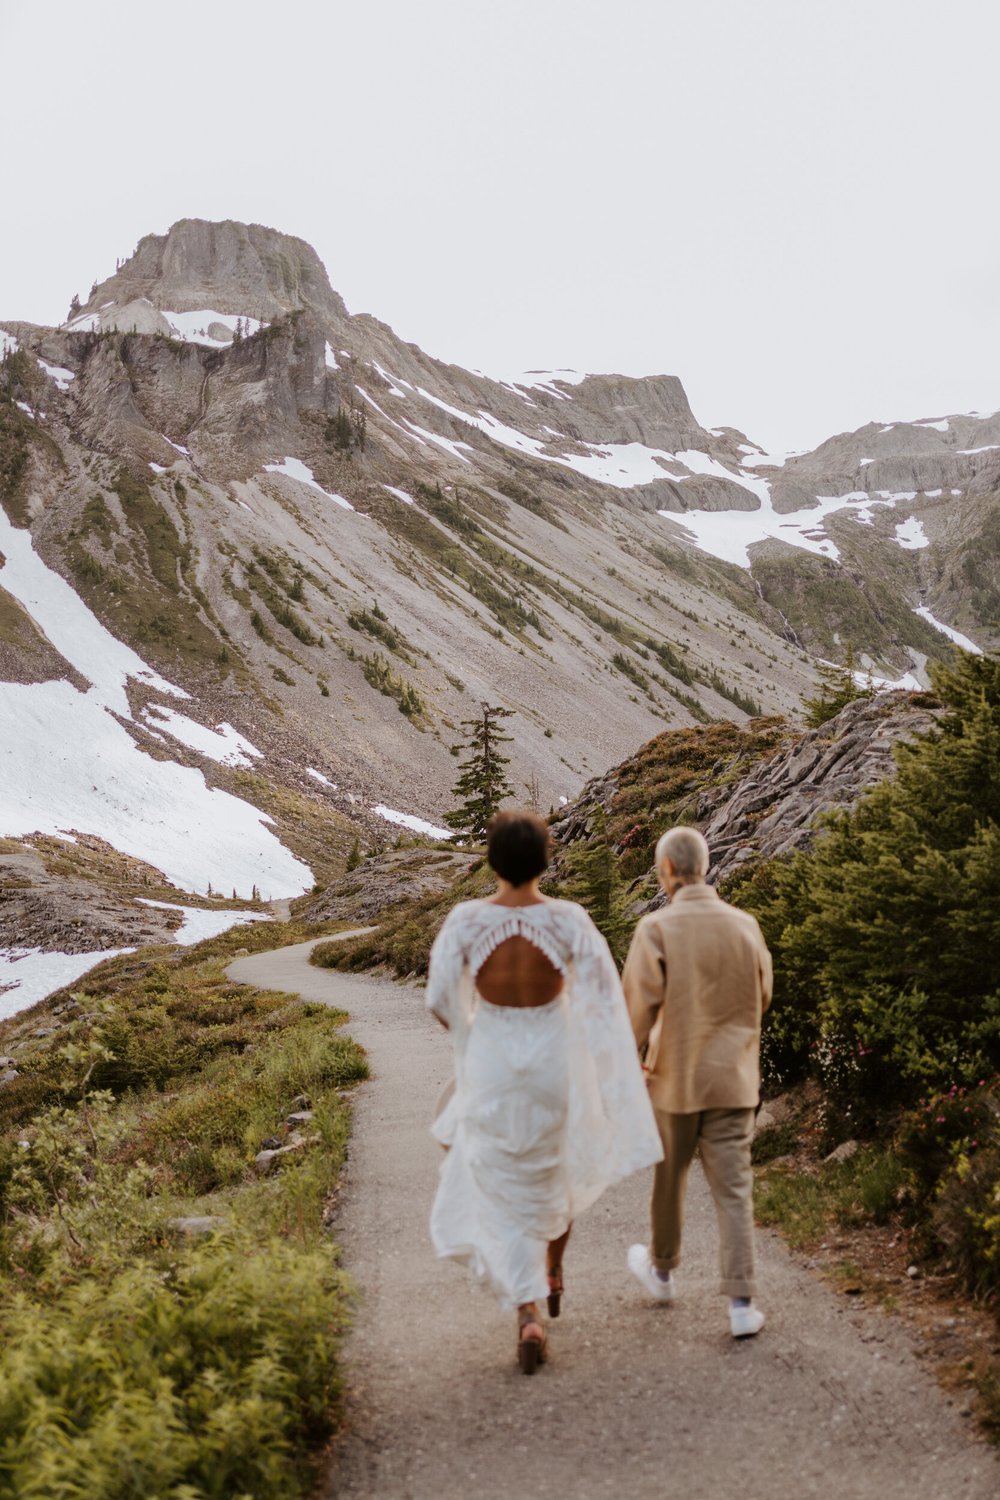 North Cascades National Park Elopement at Bagley Lake, Mt.Baker Elopement, Artist Point Elopement, Pacific Northwest Elopement, Lesbian Couple, Photography by Tida Svy | www.tidasvy.com